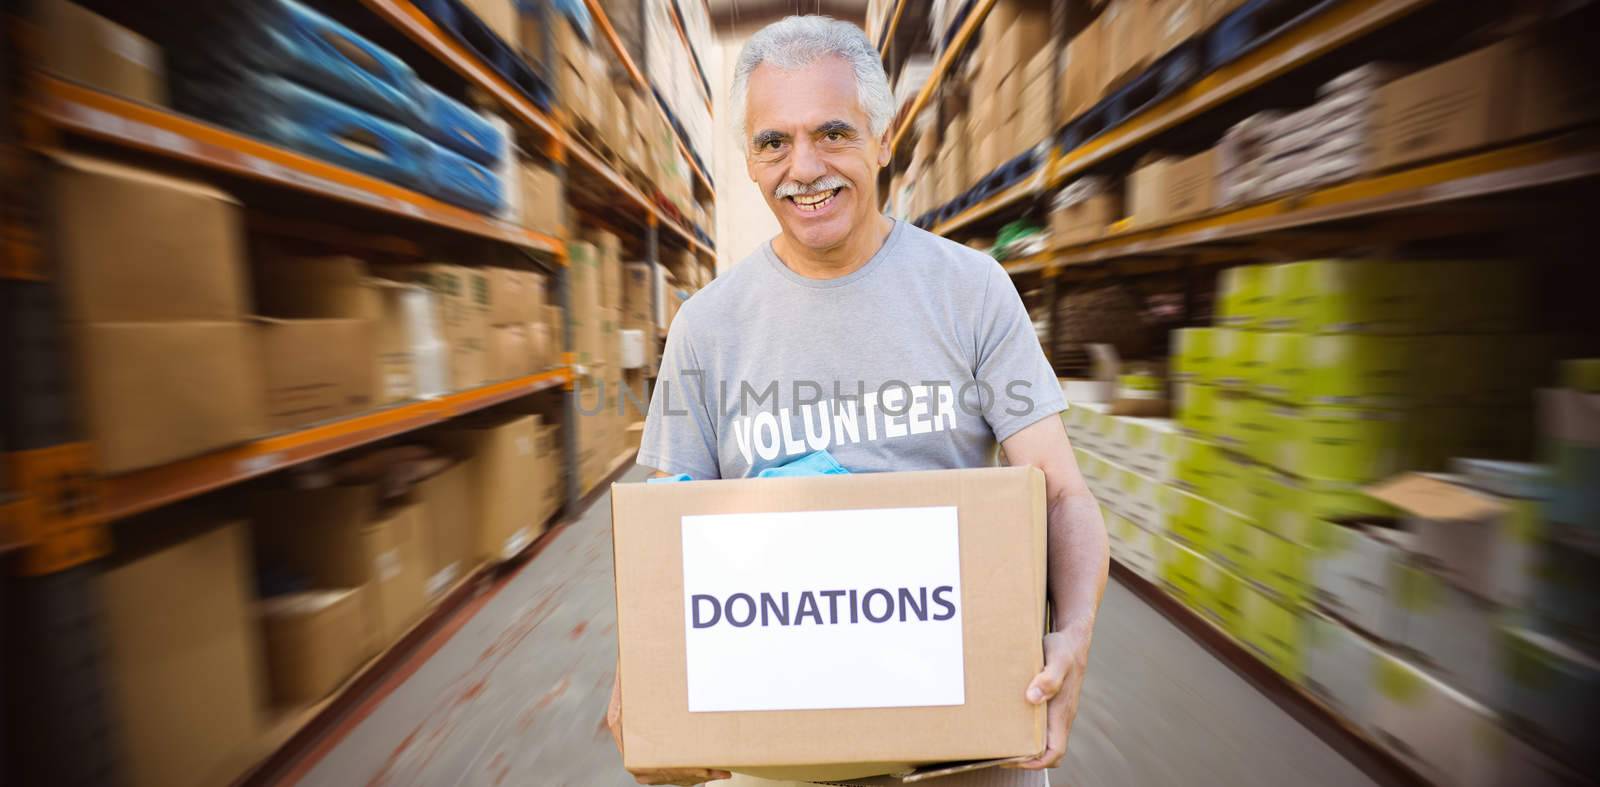 Happy volunteer senior holding donation box against worker with trolley of boxes